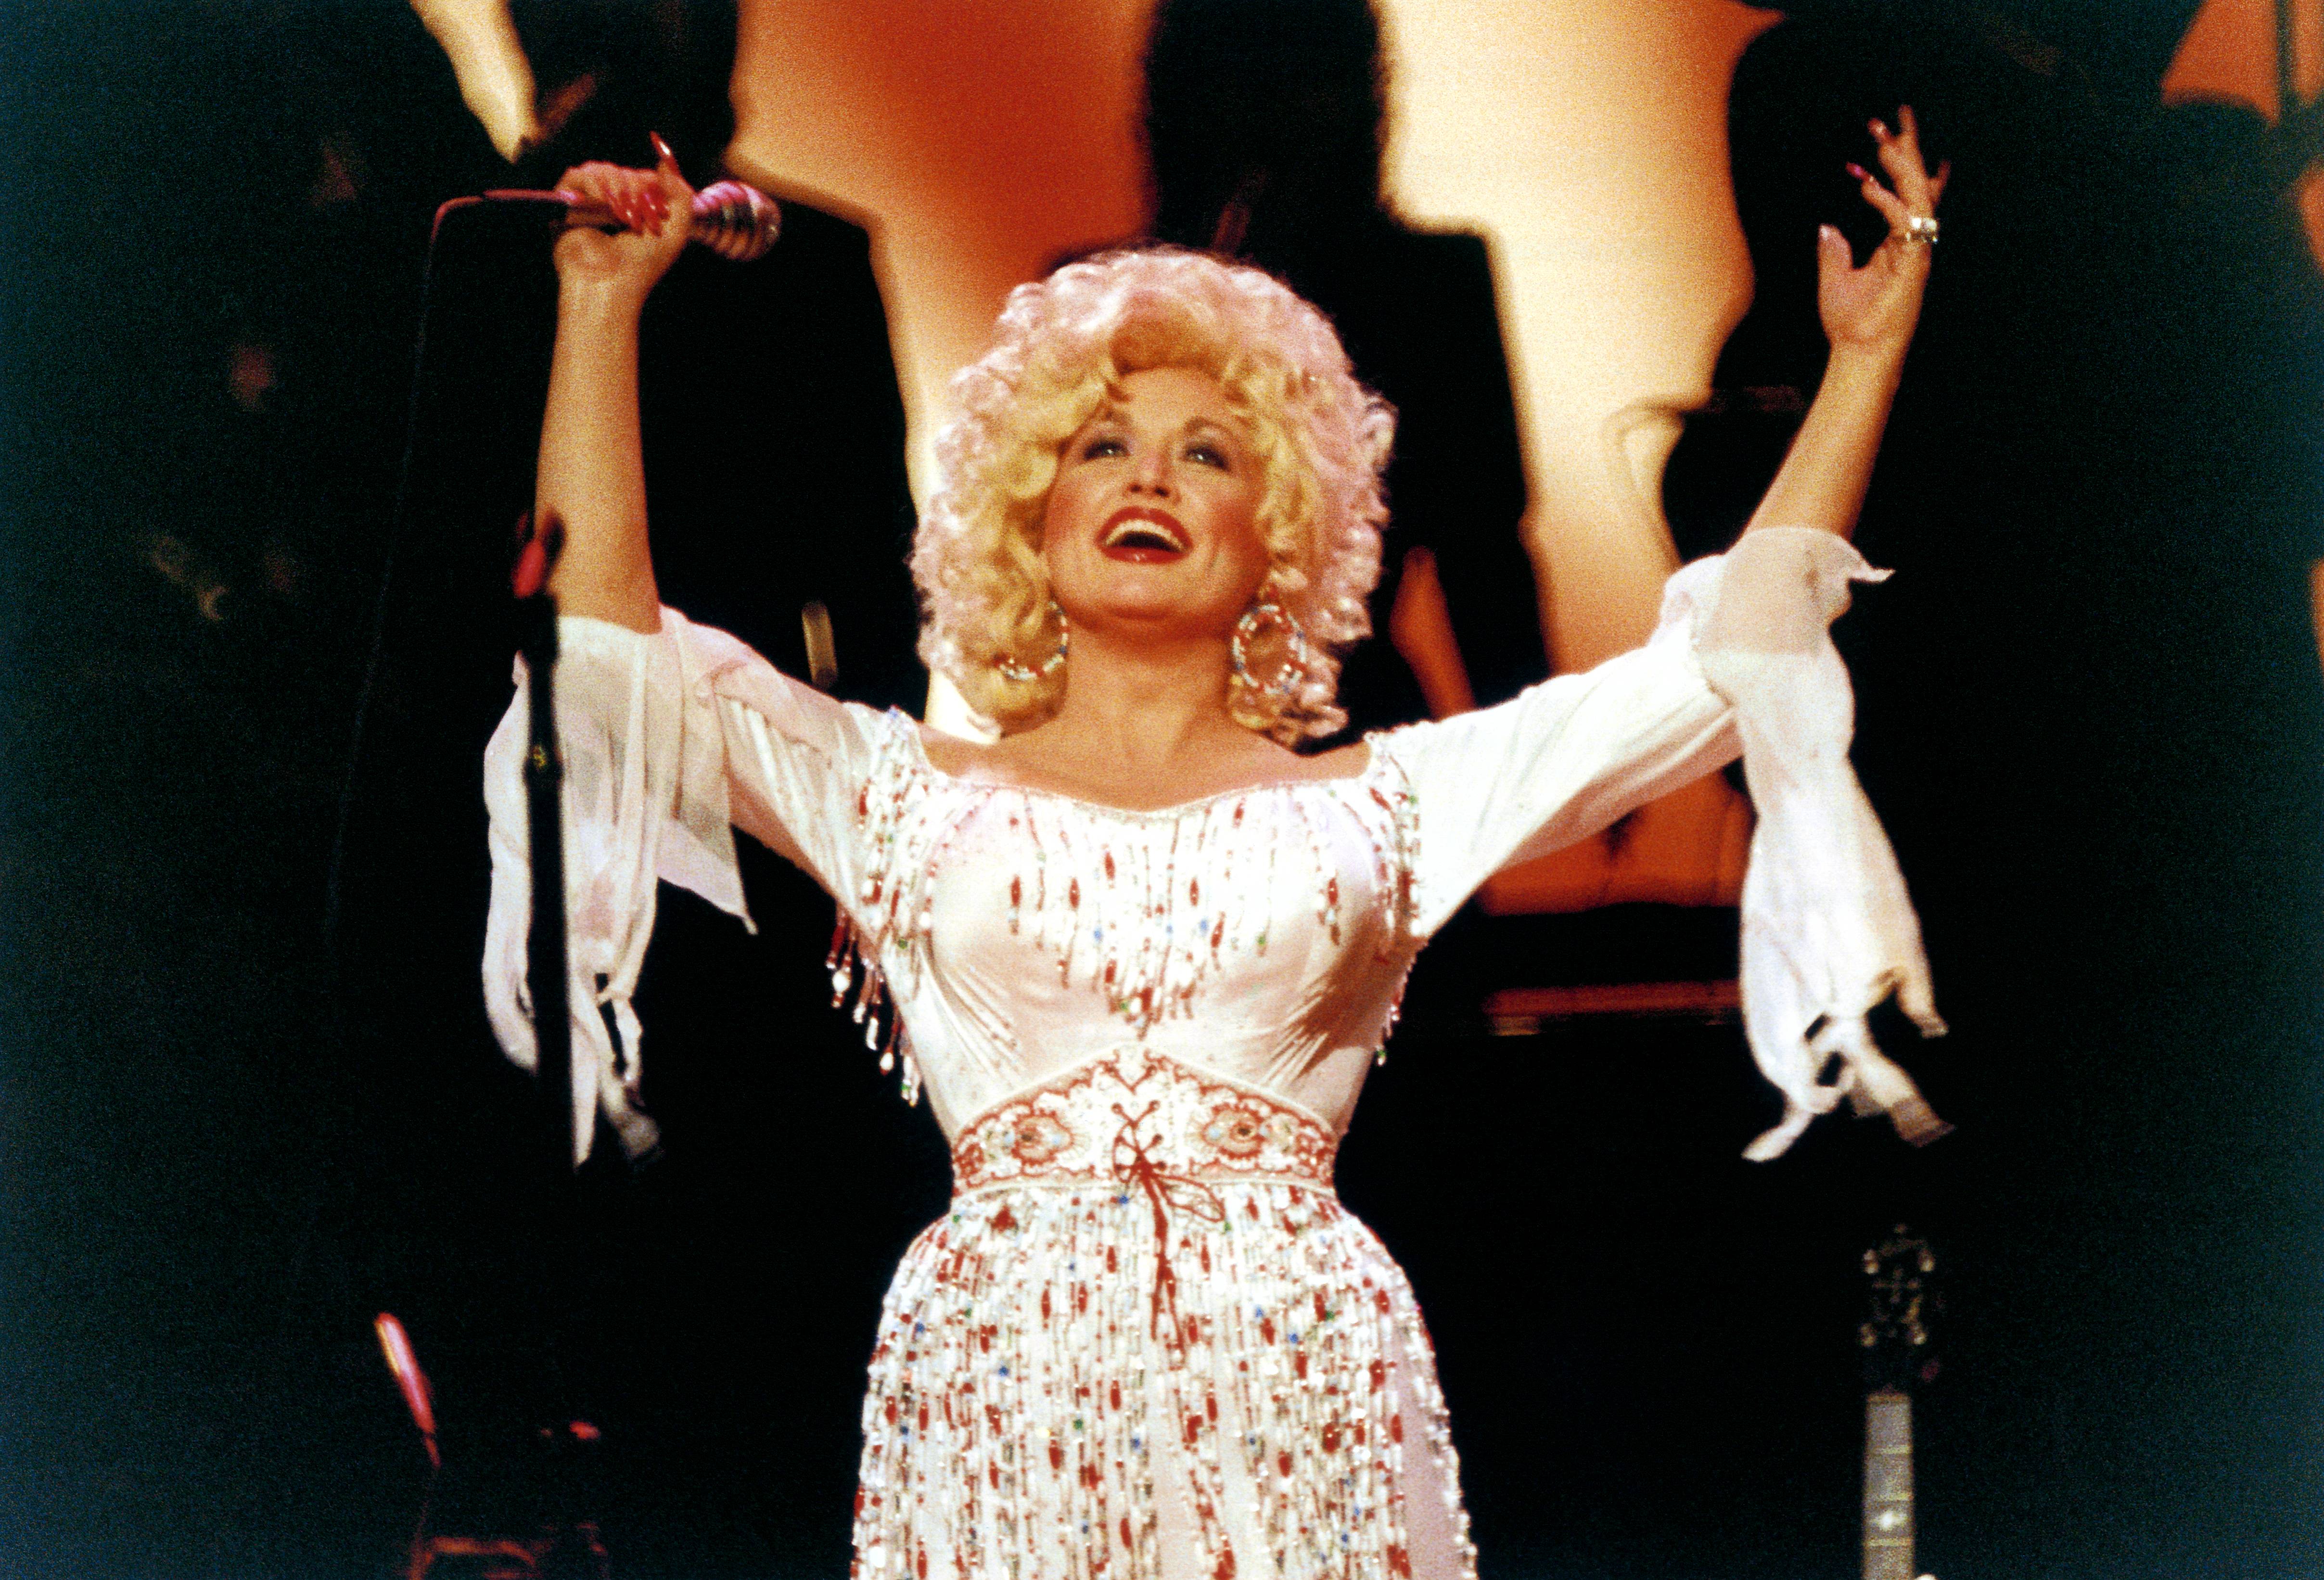 Dolly Parton on stage, singing and raising her arms in the air.